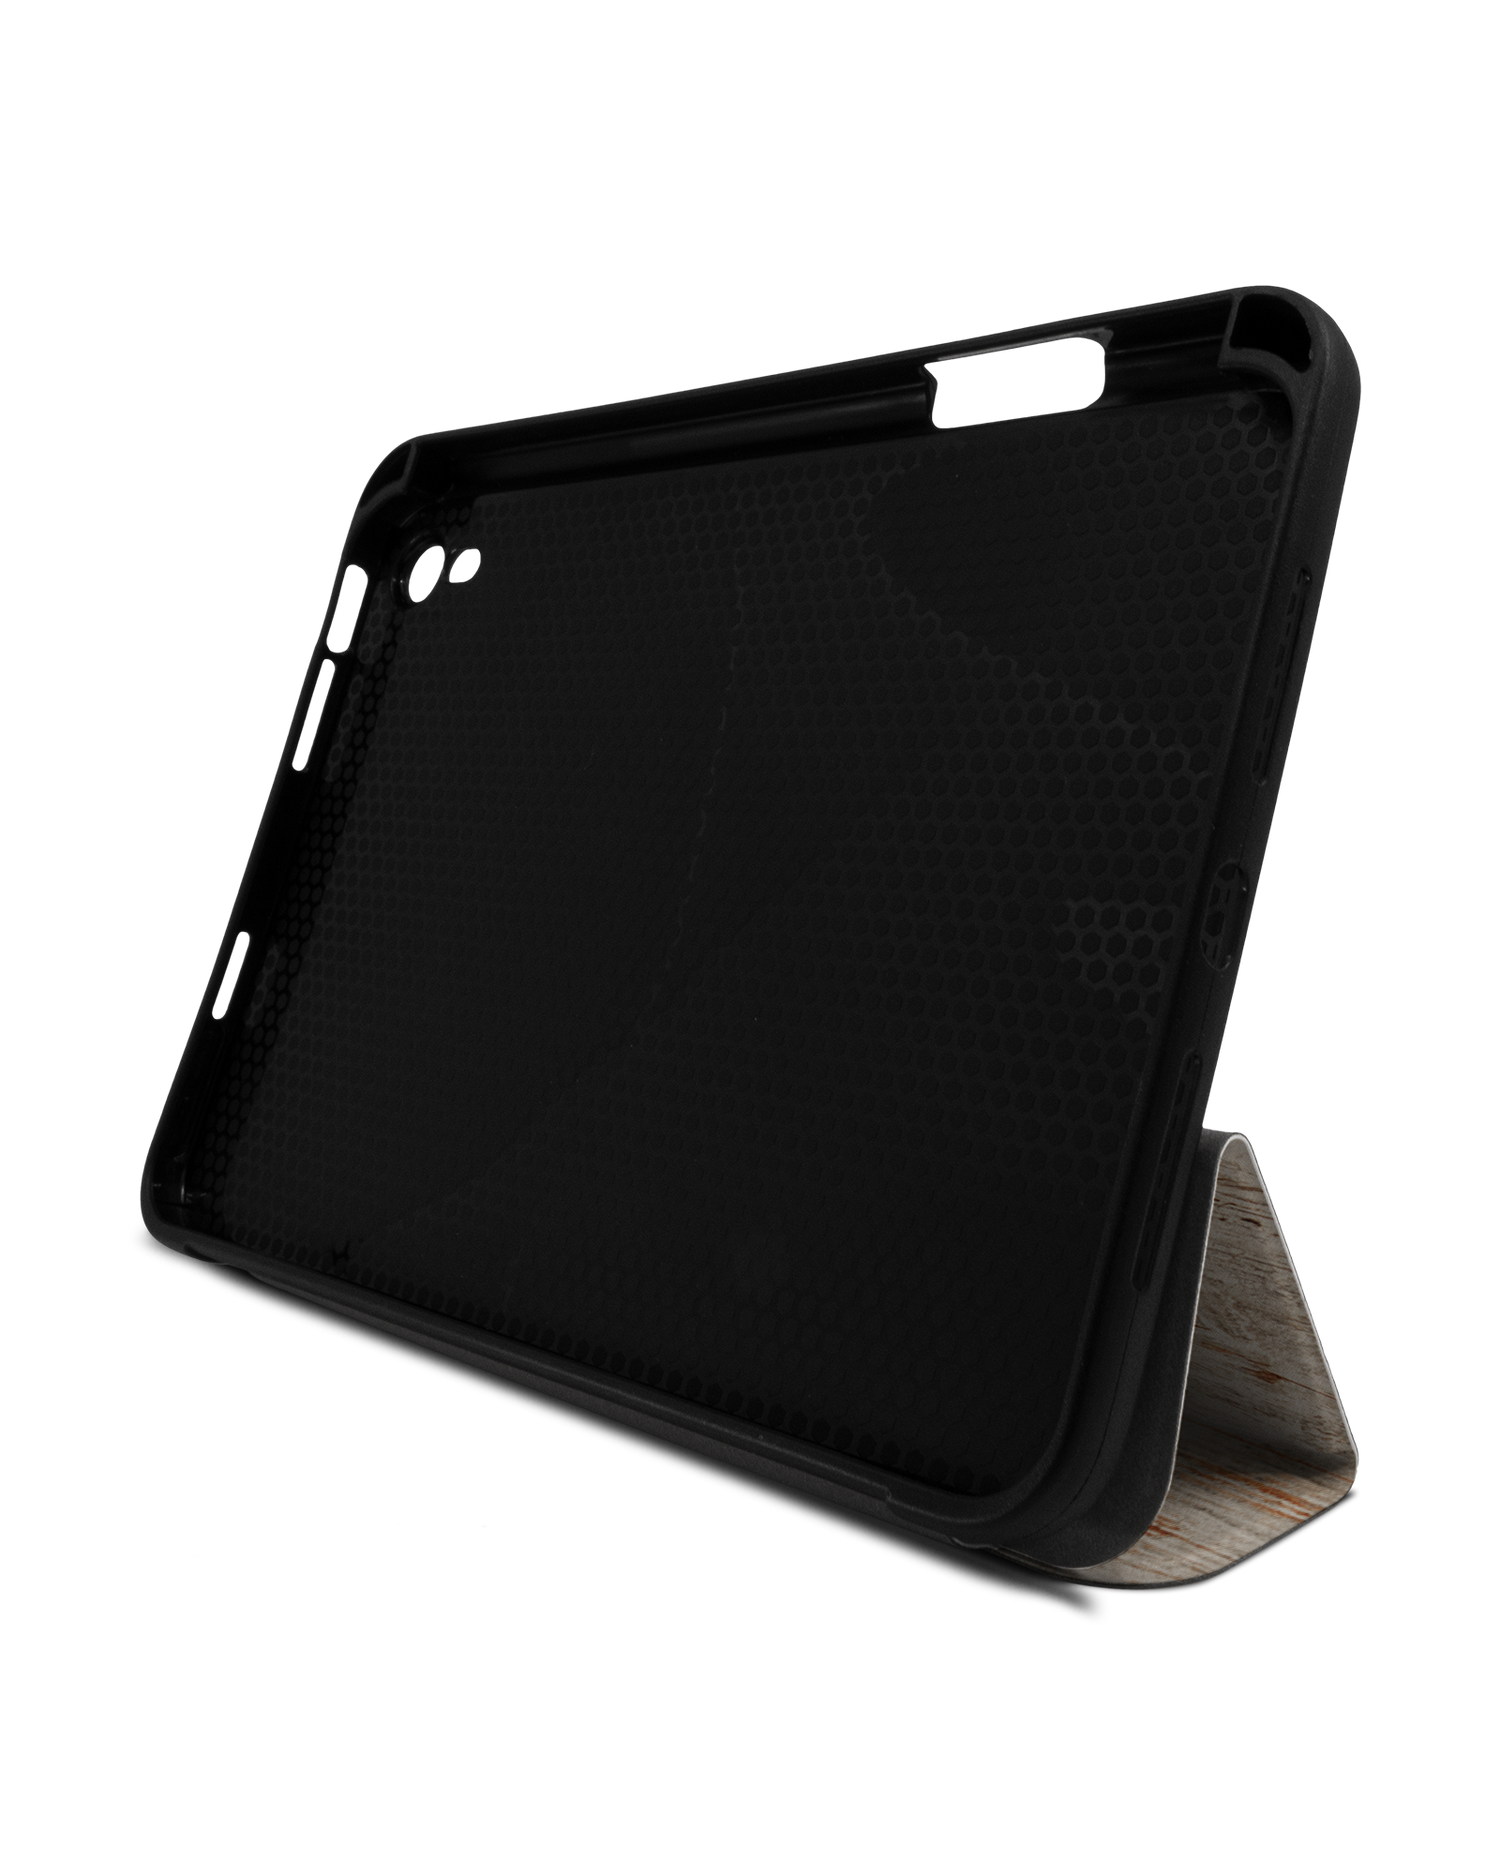 Drink Coffee iPad Case with Pencil Holder Apple iPad mini 6 (2021): Set up in landscape format (front view)